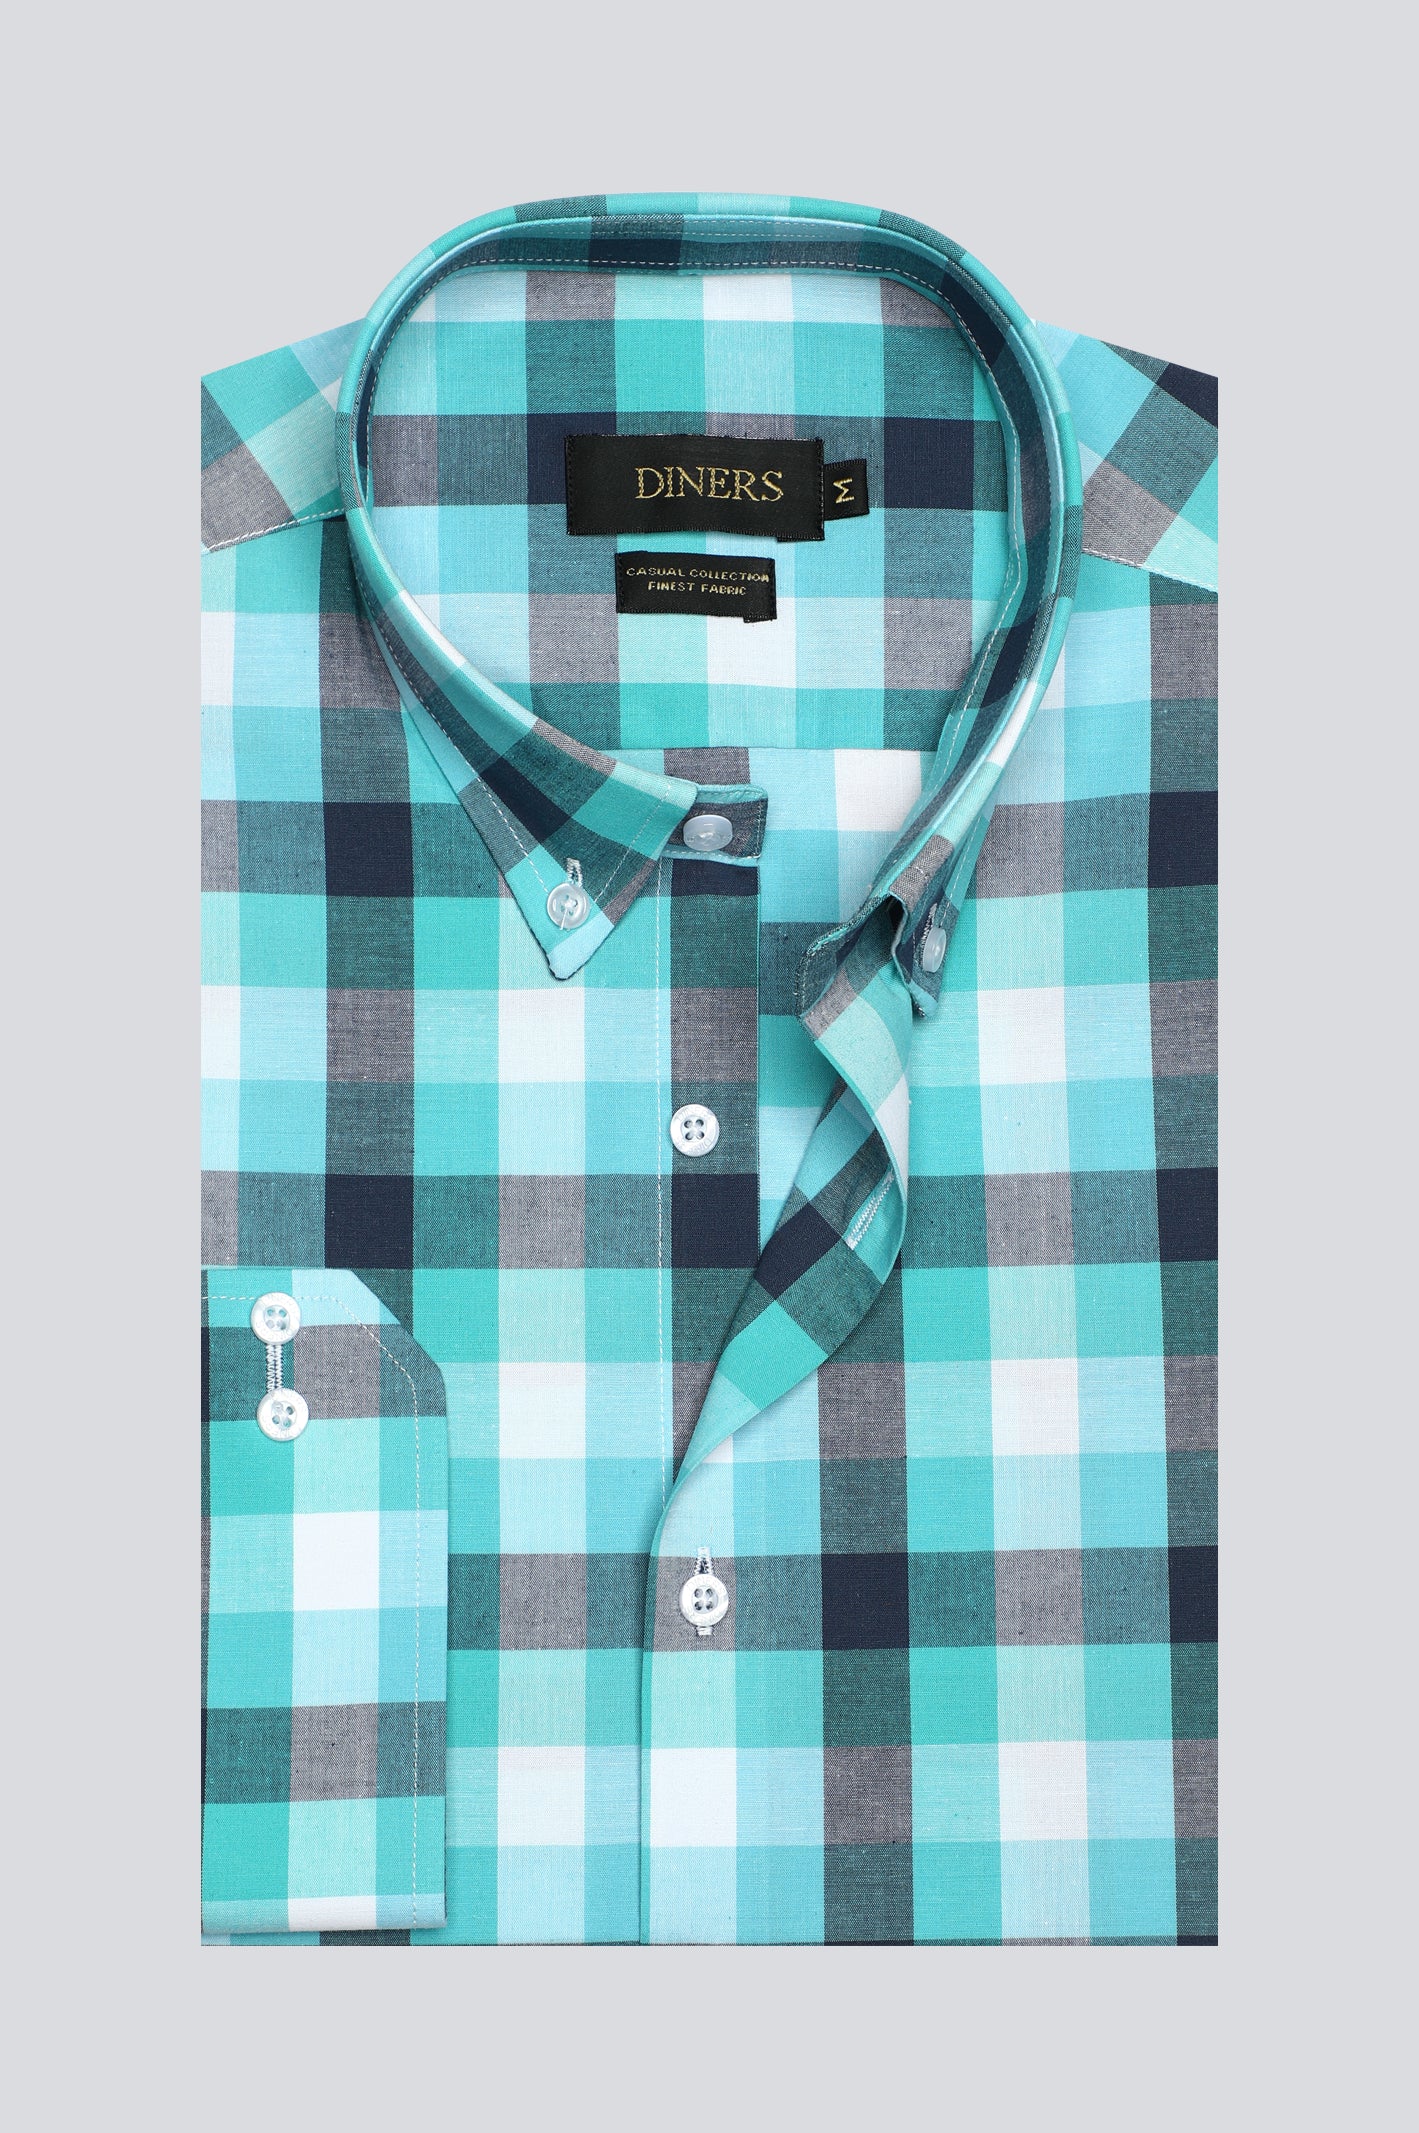 Aqua Gingham Check Casual Shirt From Diners